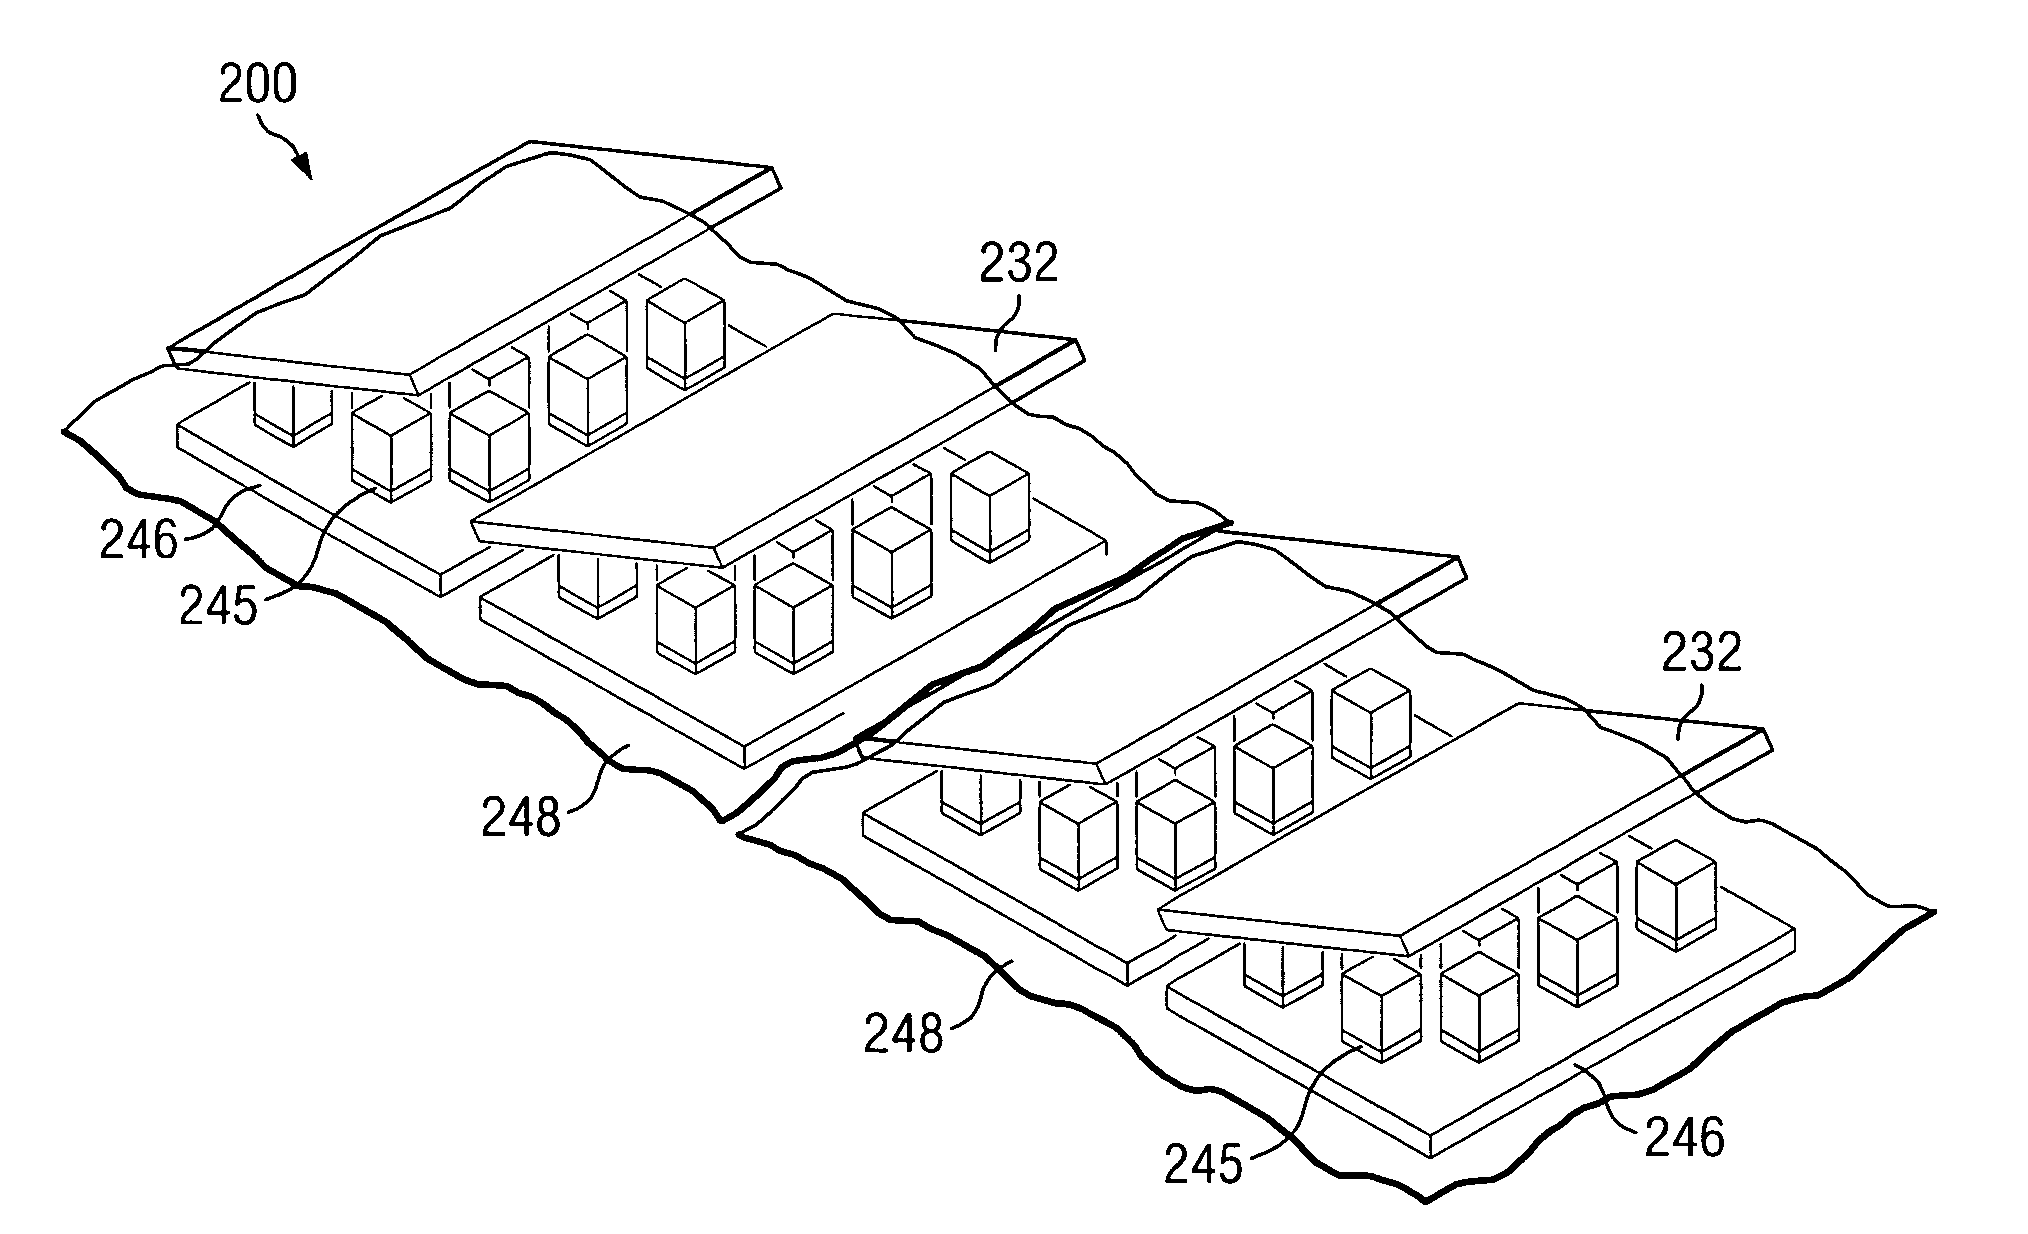 Build-in-place method of manufacturing thermoelectric modules